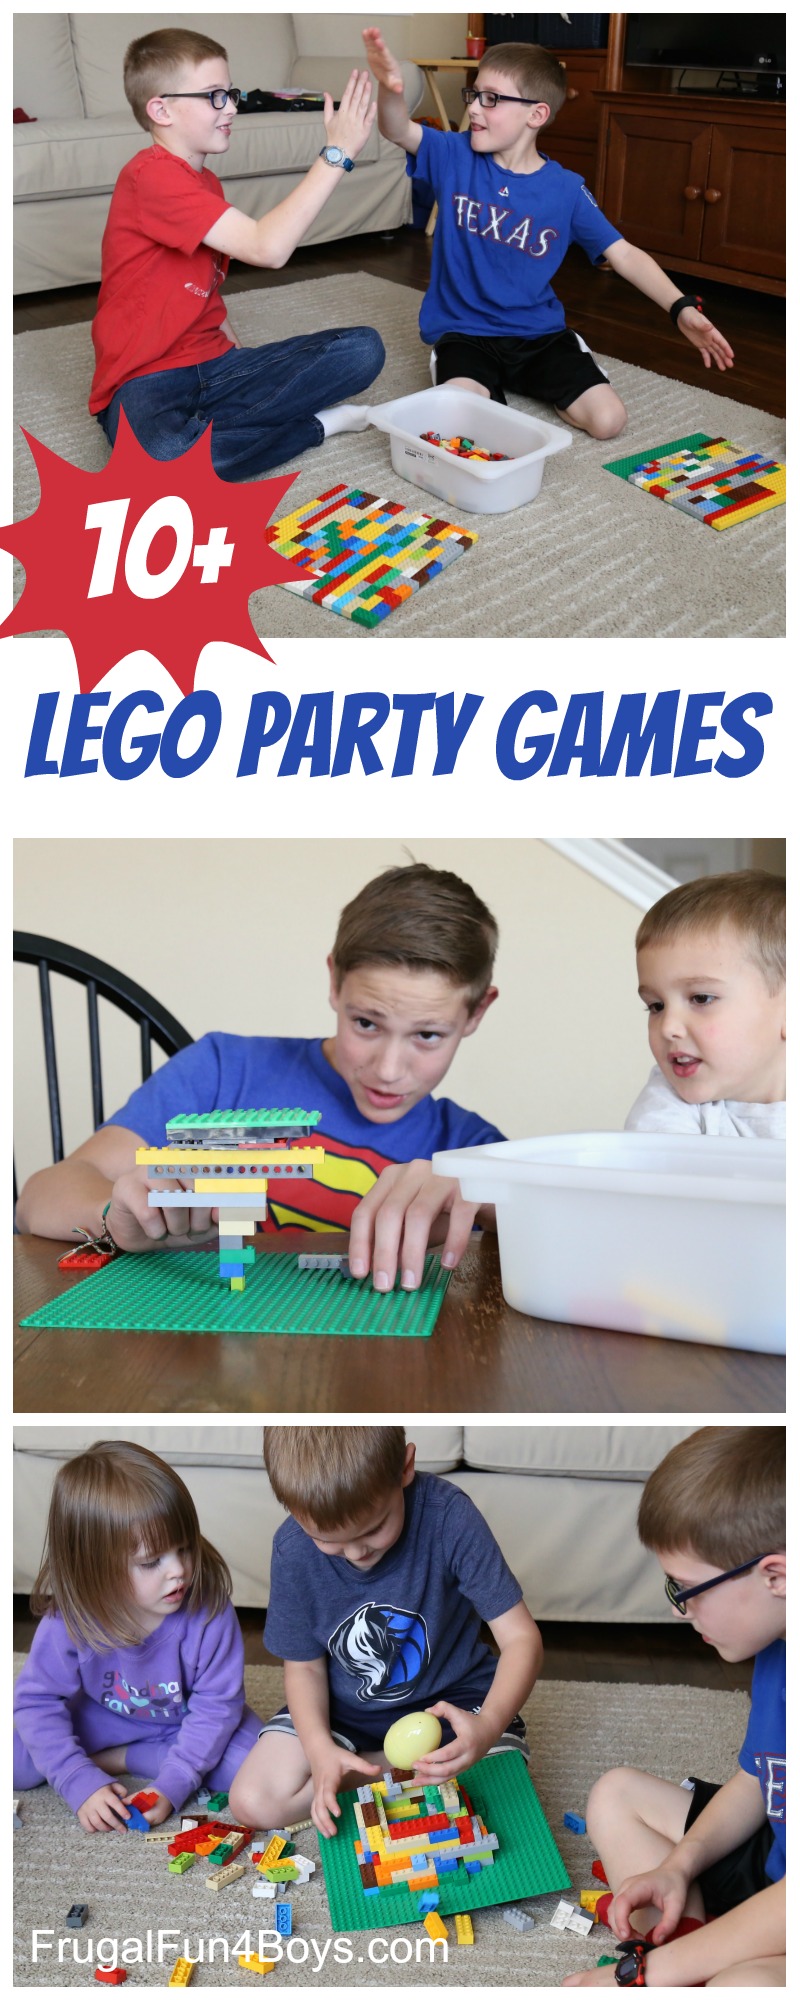 10+ Totally Awesome LEGO Party Games